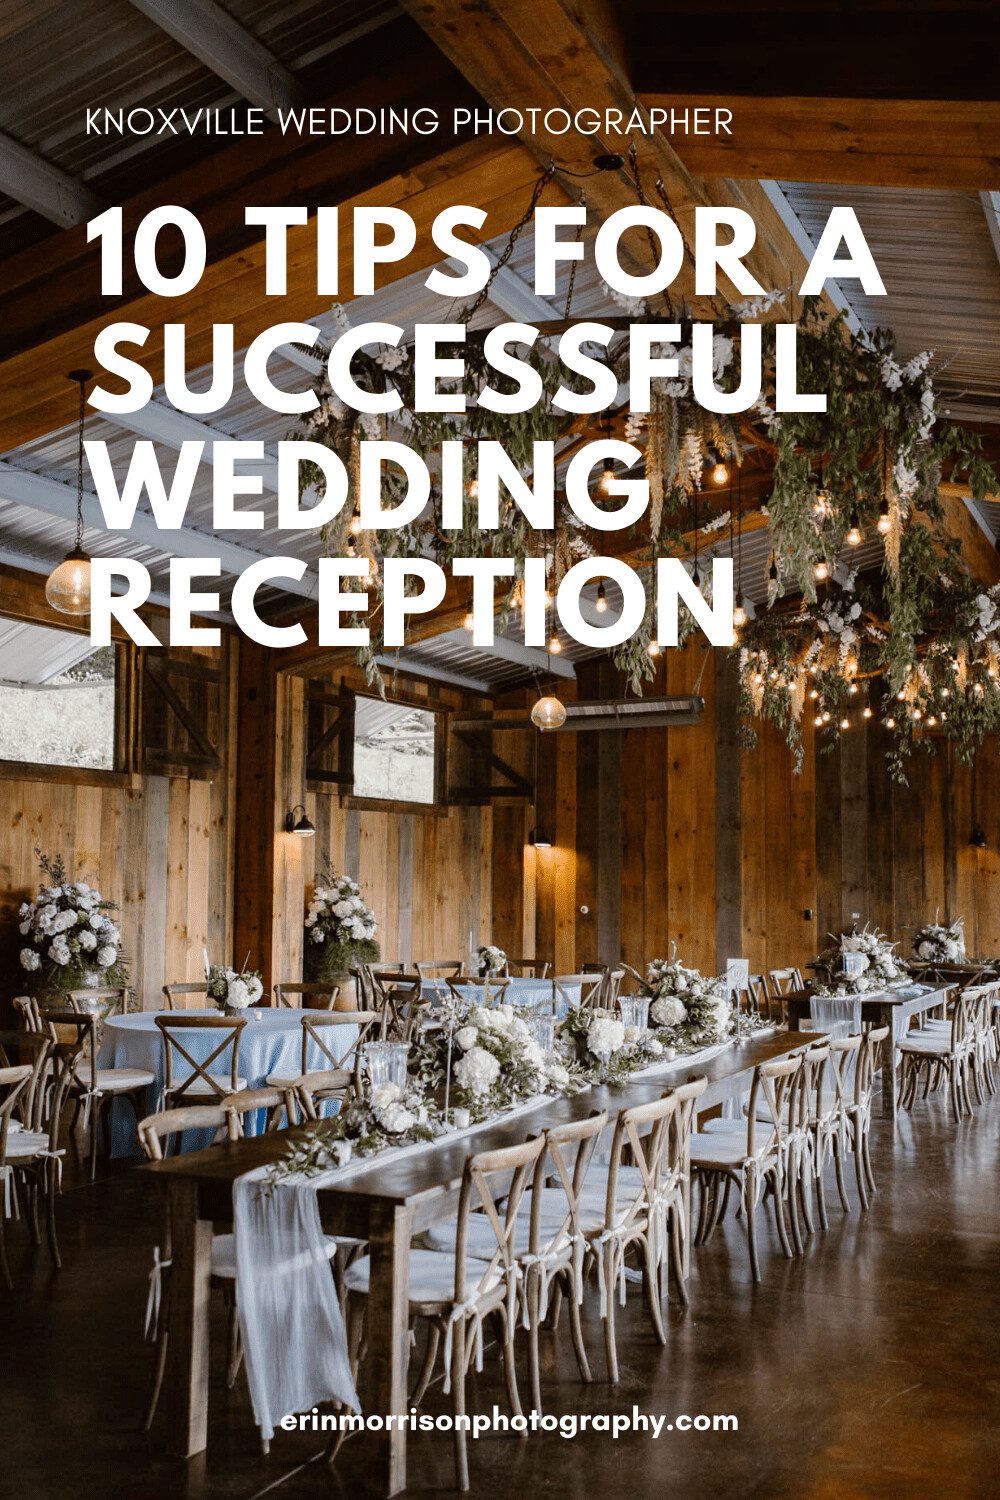 10 Tips for a Successful Wedding Reception